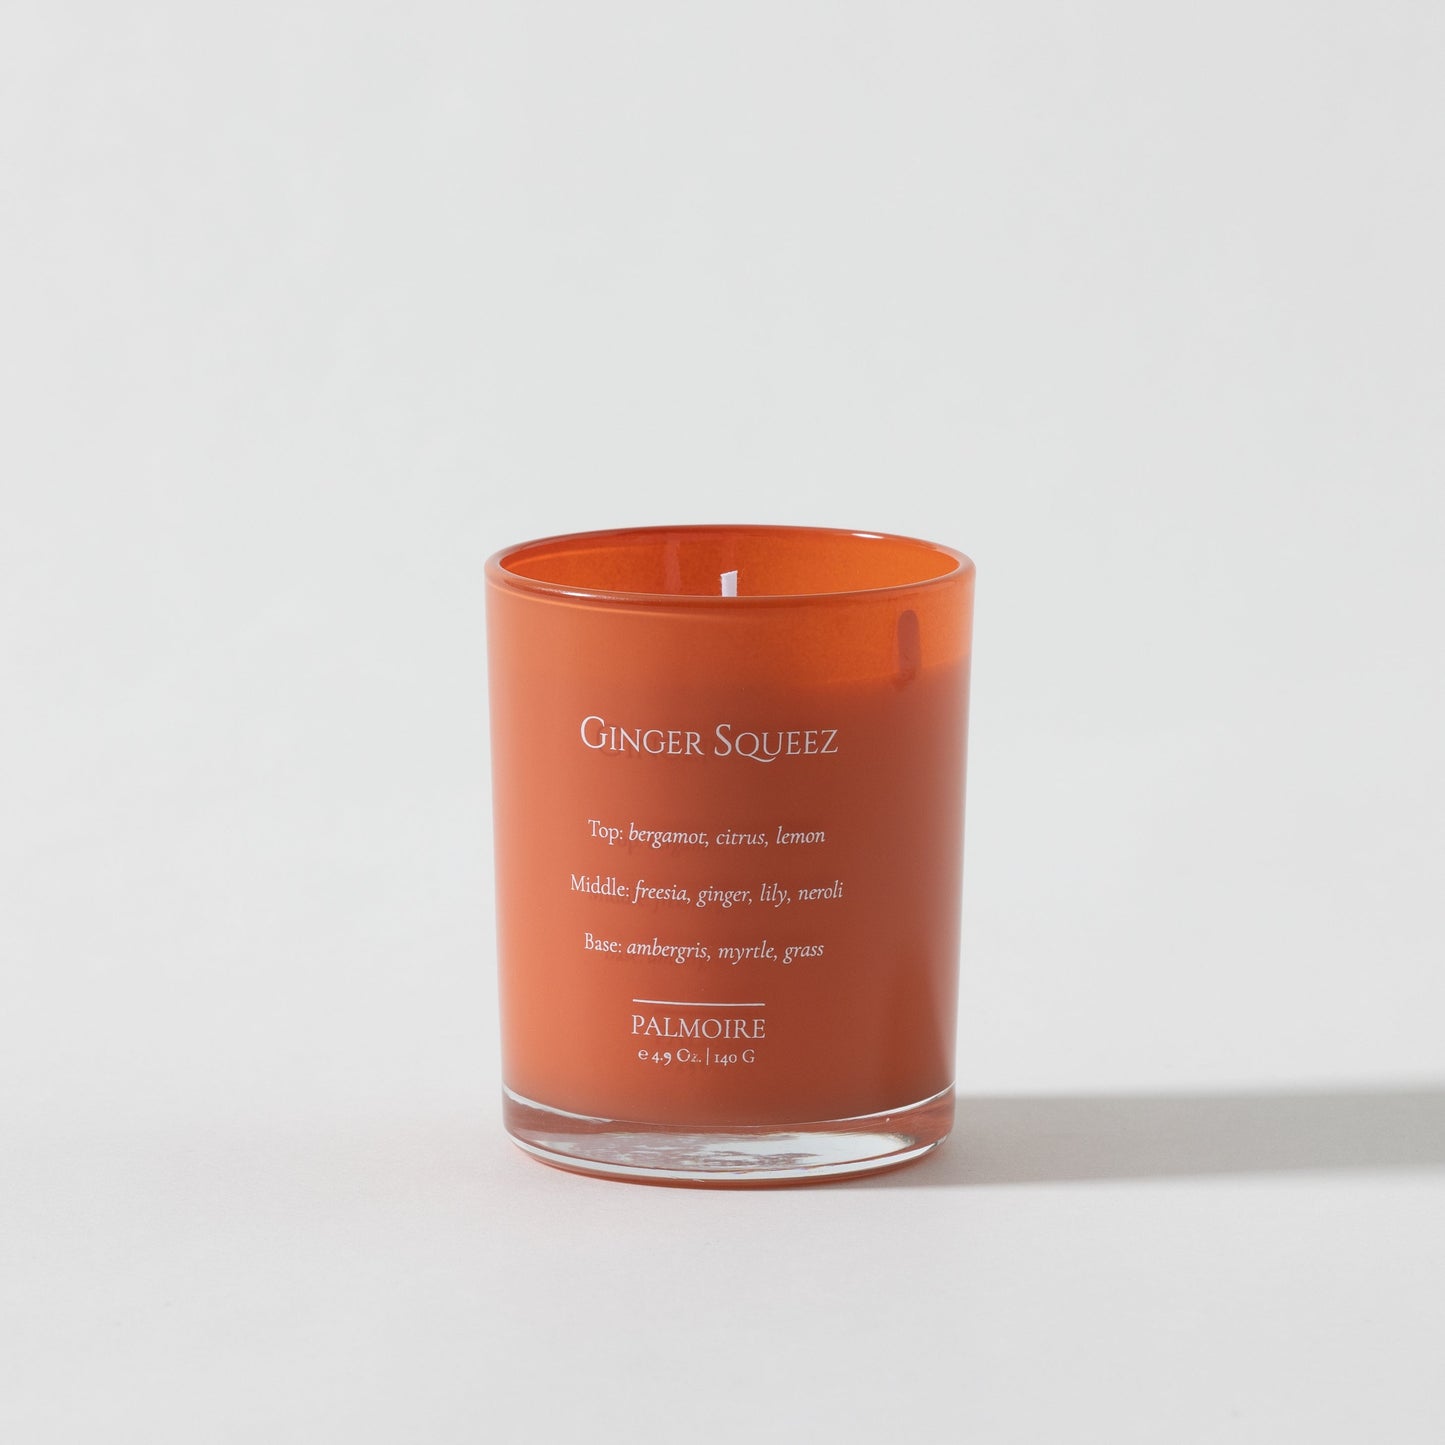 Ginger Squeez Soy Wax Candle